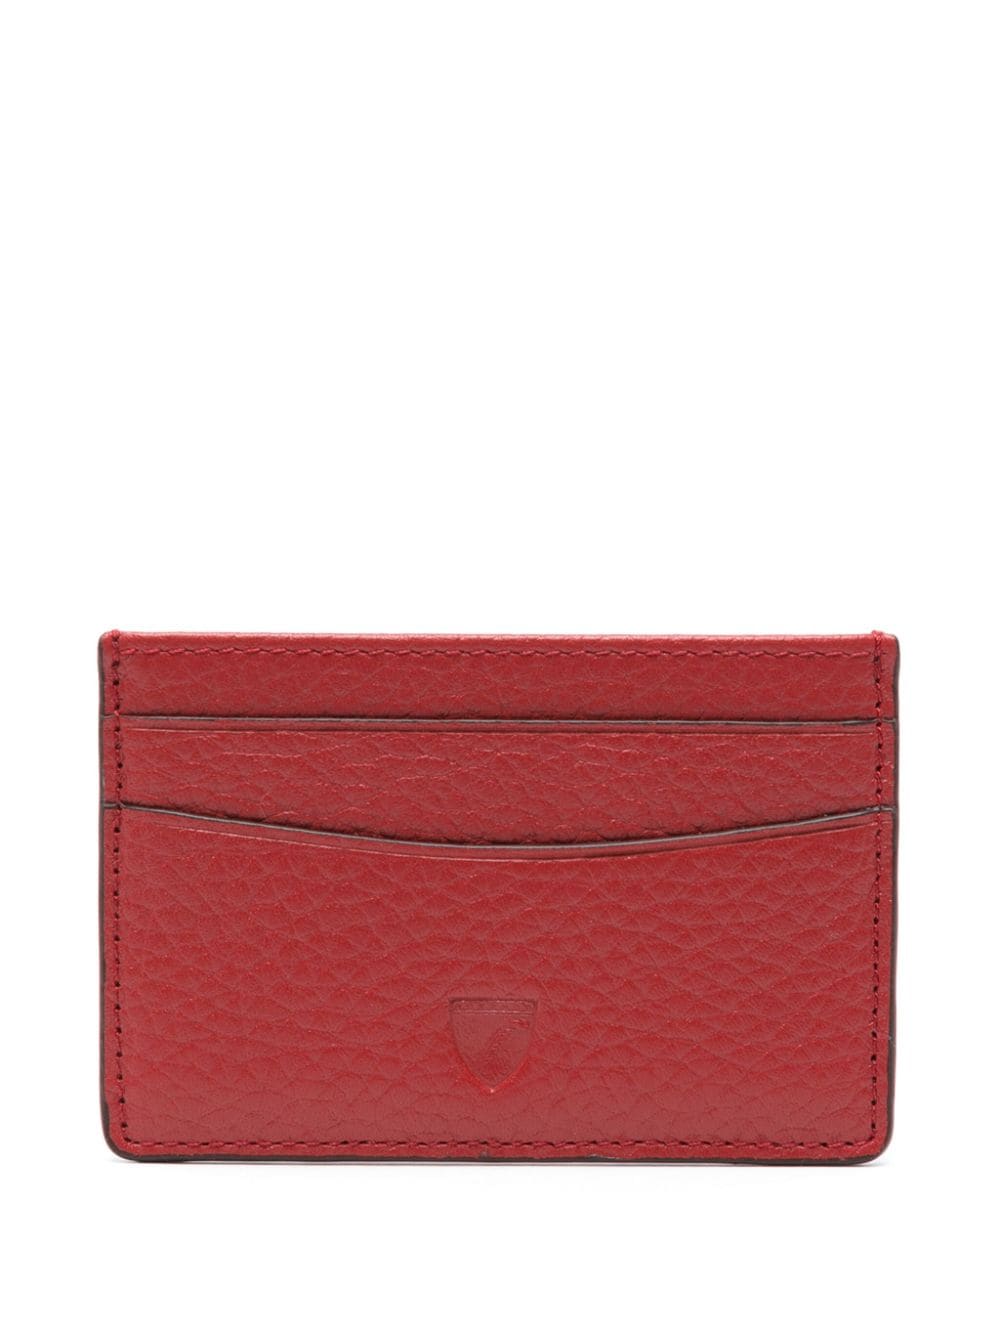 Aspinal Of London logo-stamp leather cardholder - Rosso